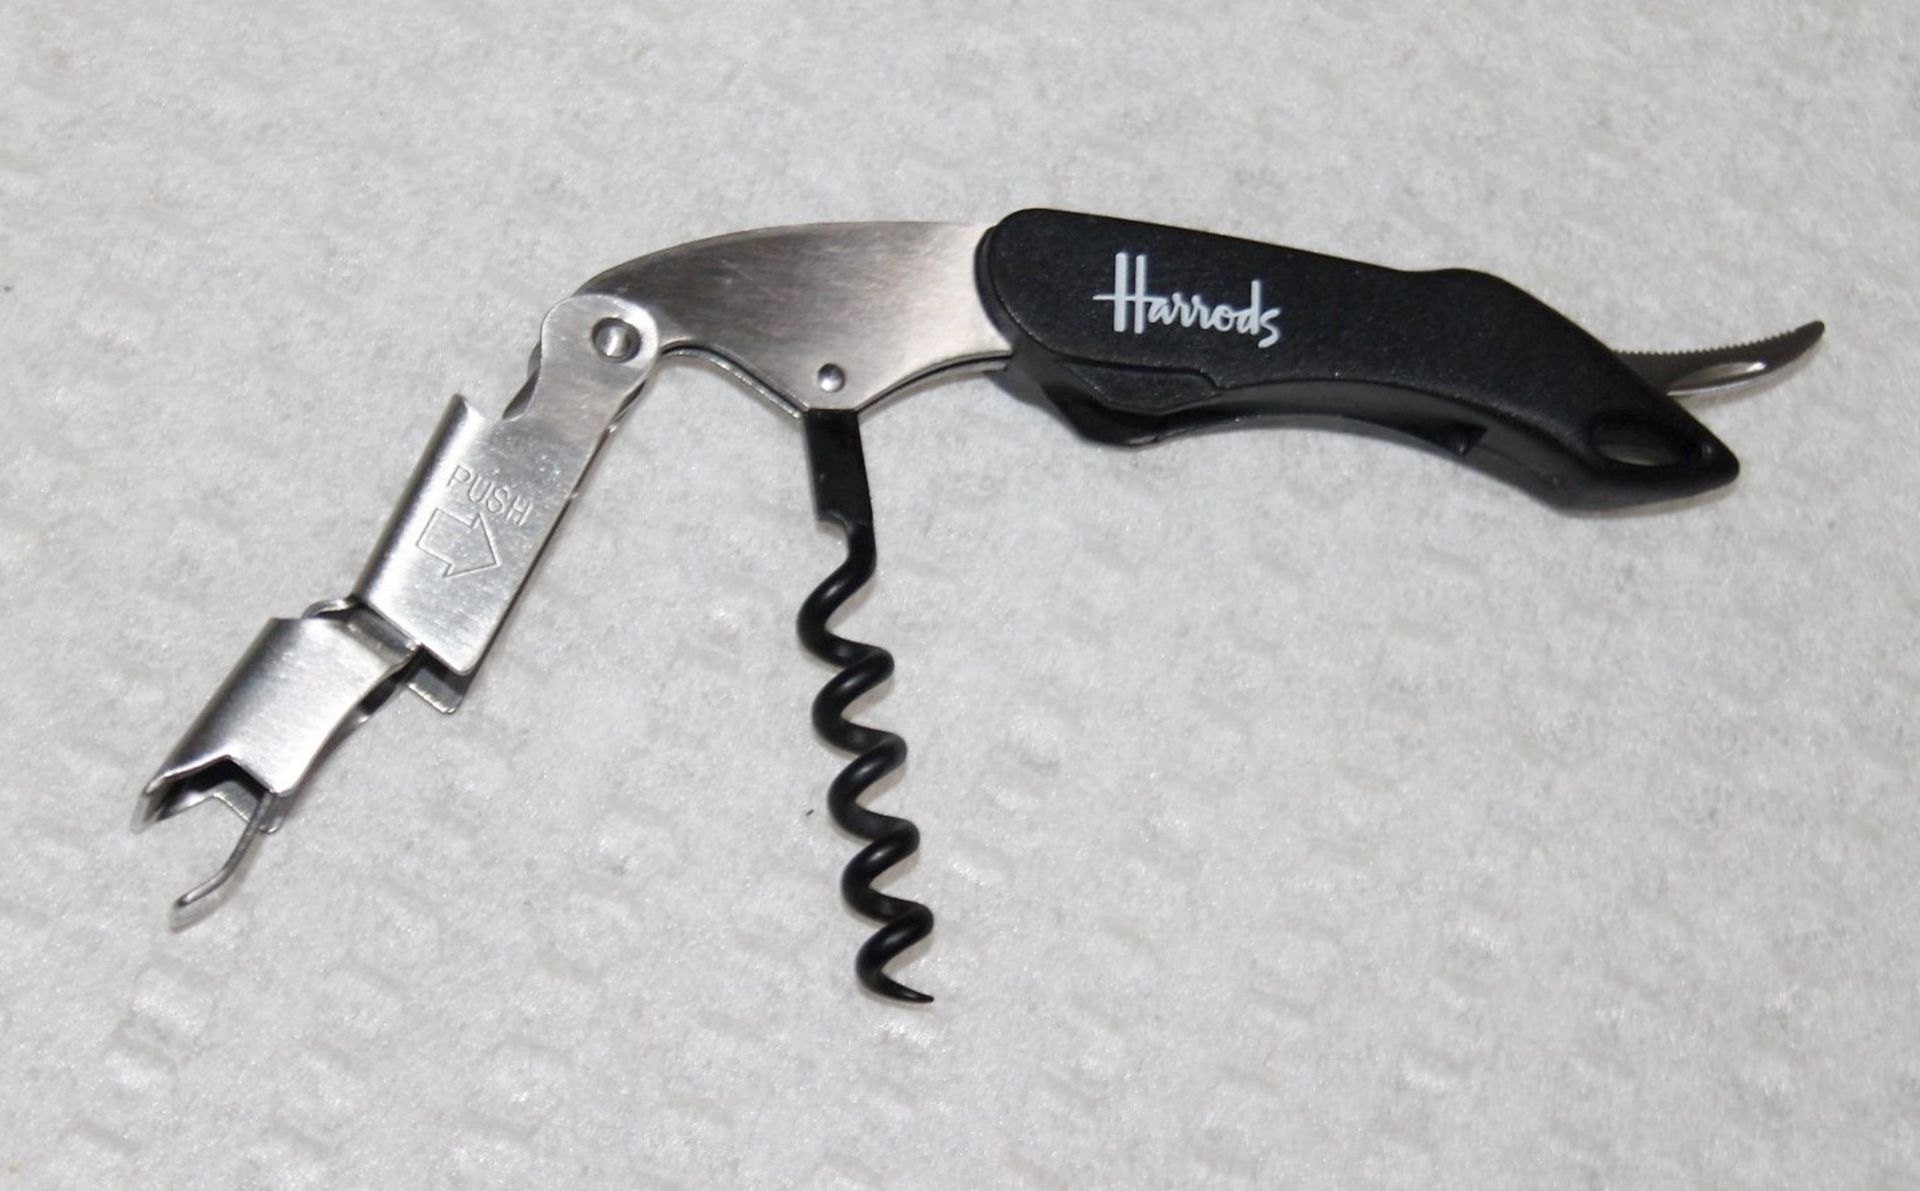 1 x COUTALE Premium Waiters Corkscrew And Wine Bottle Opener, With 'Famous' Branding - Original - Image 3 of 6